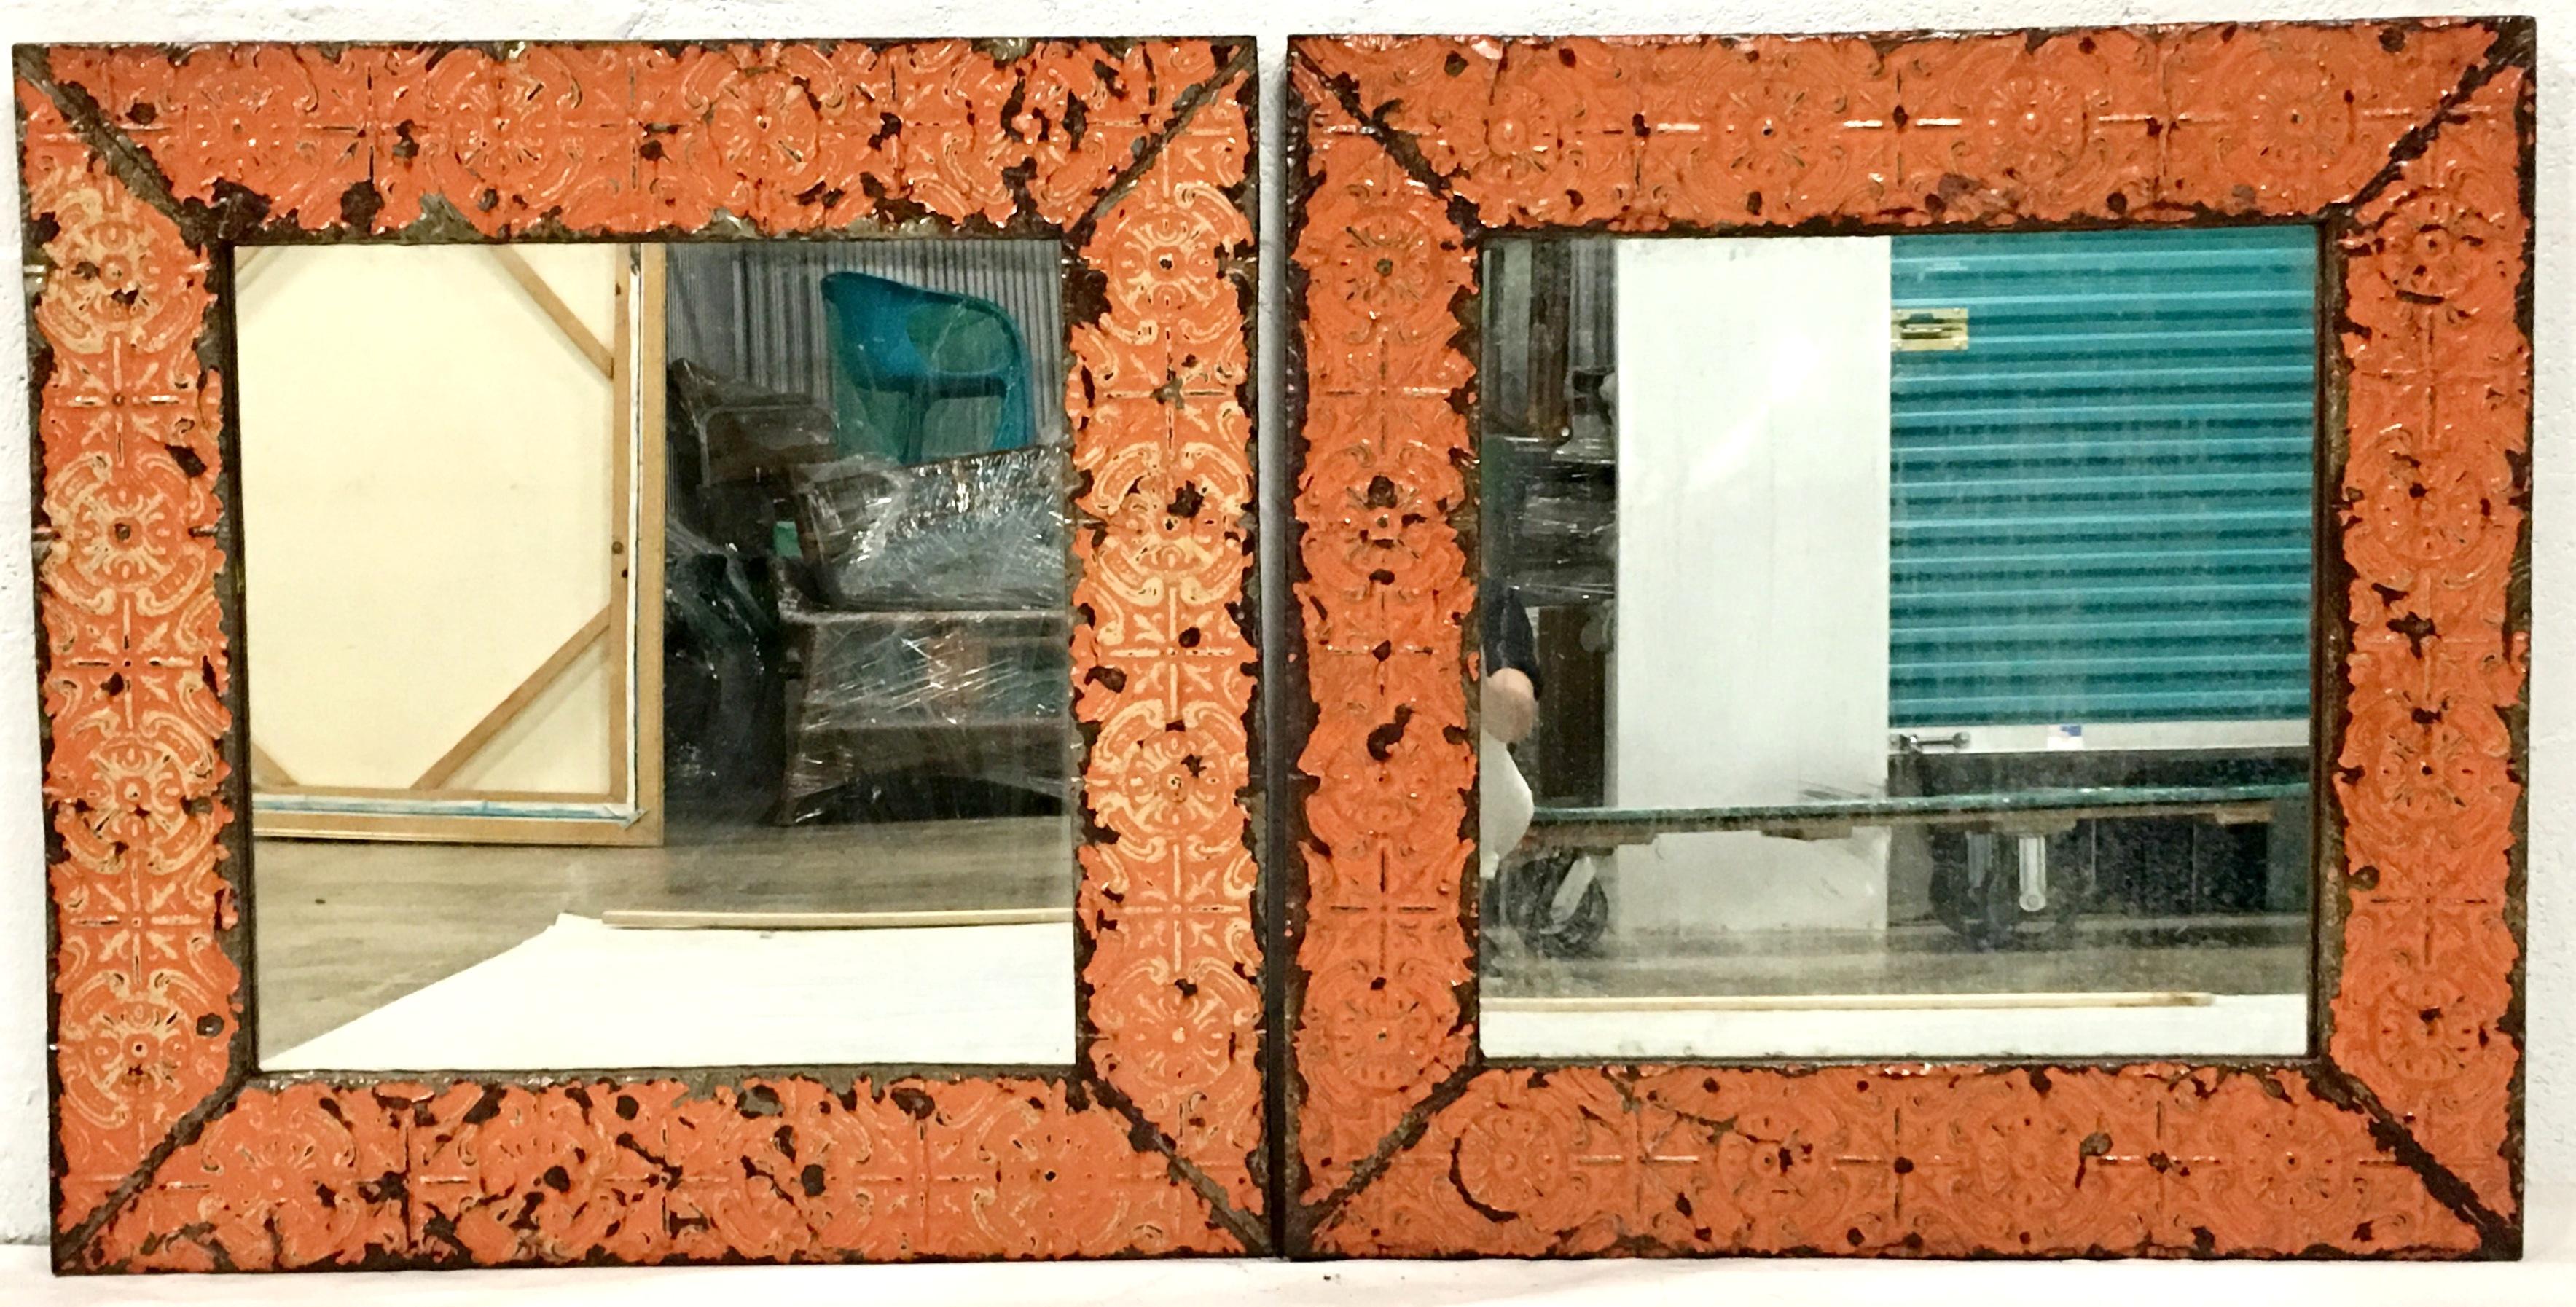 Antique Pair Of Copper New York City Ceiling Tile Mirrors. Salvaged from 19th Century New York City buildings, painted orange copper tile mounted on wood pair of of square wall mirrors Ready to hang with existing mounted hardware.